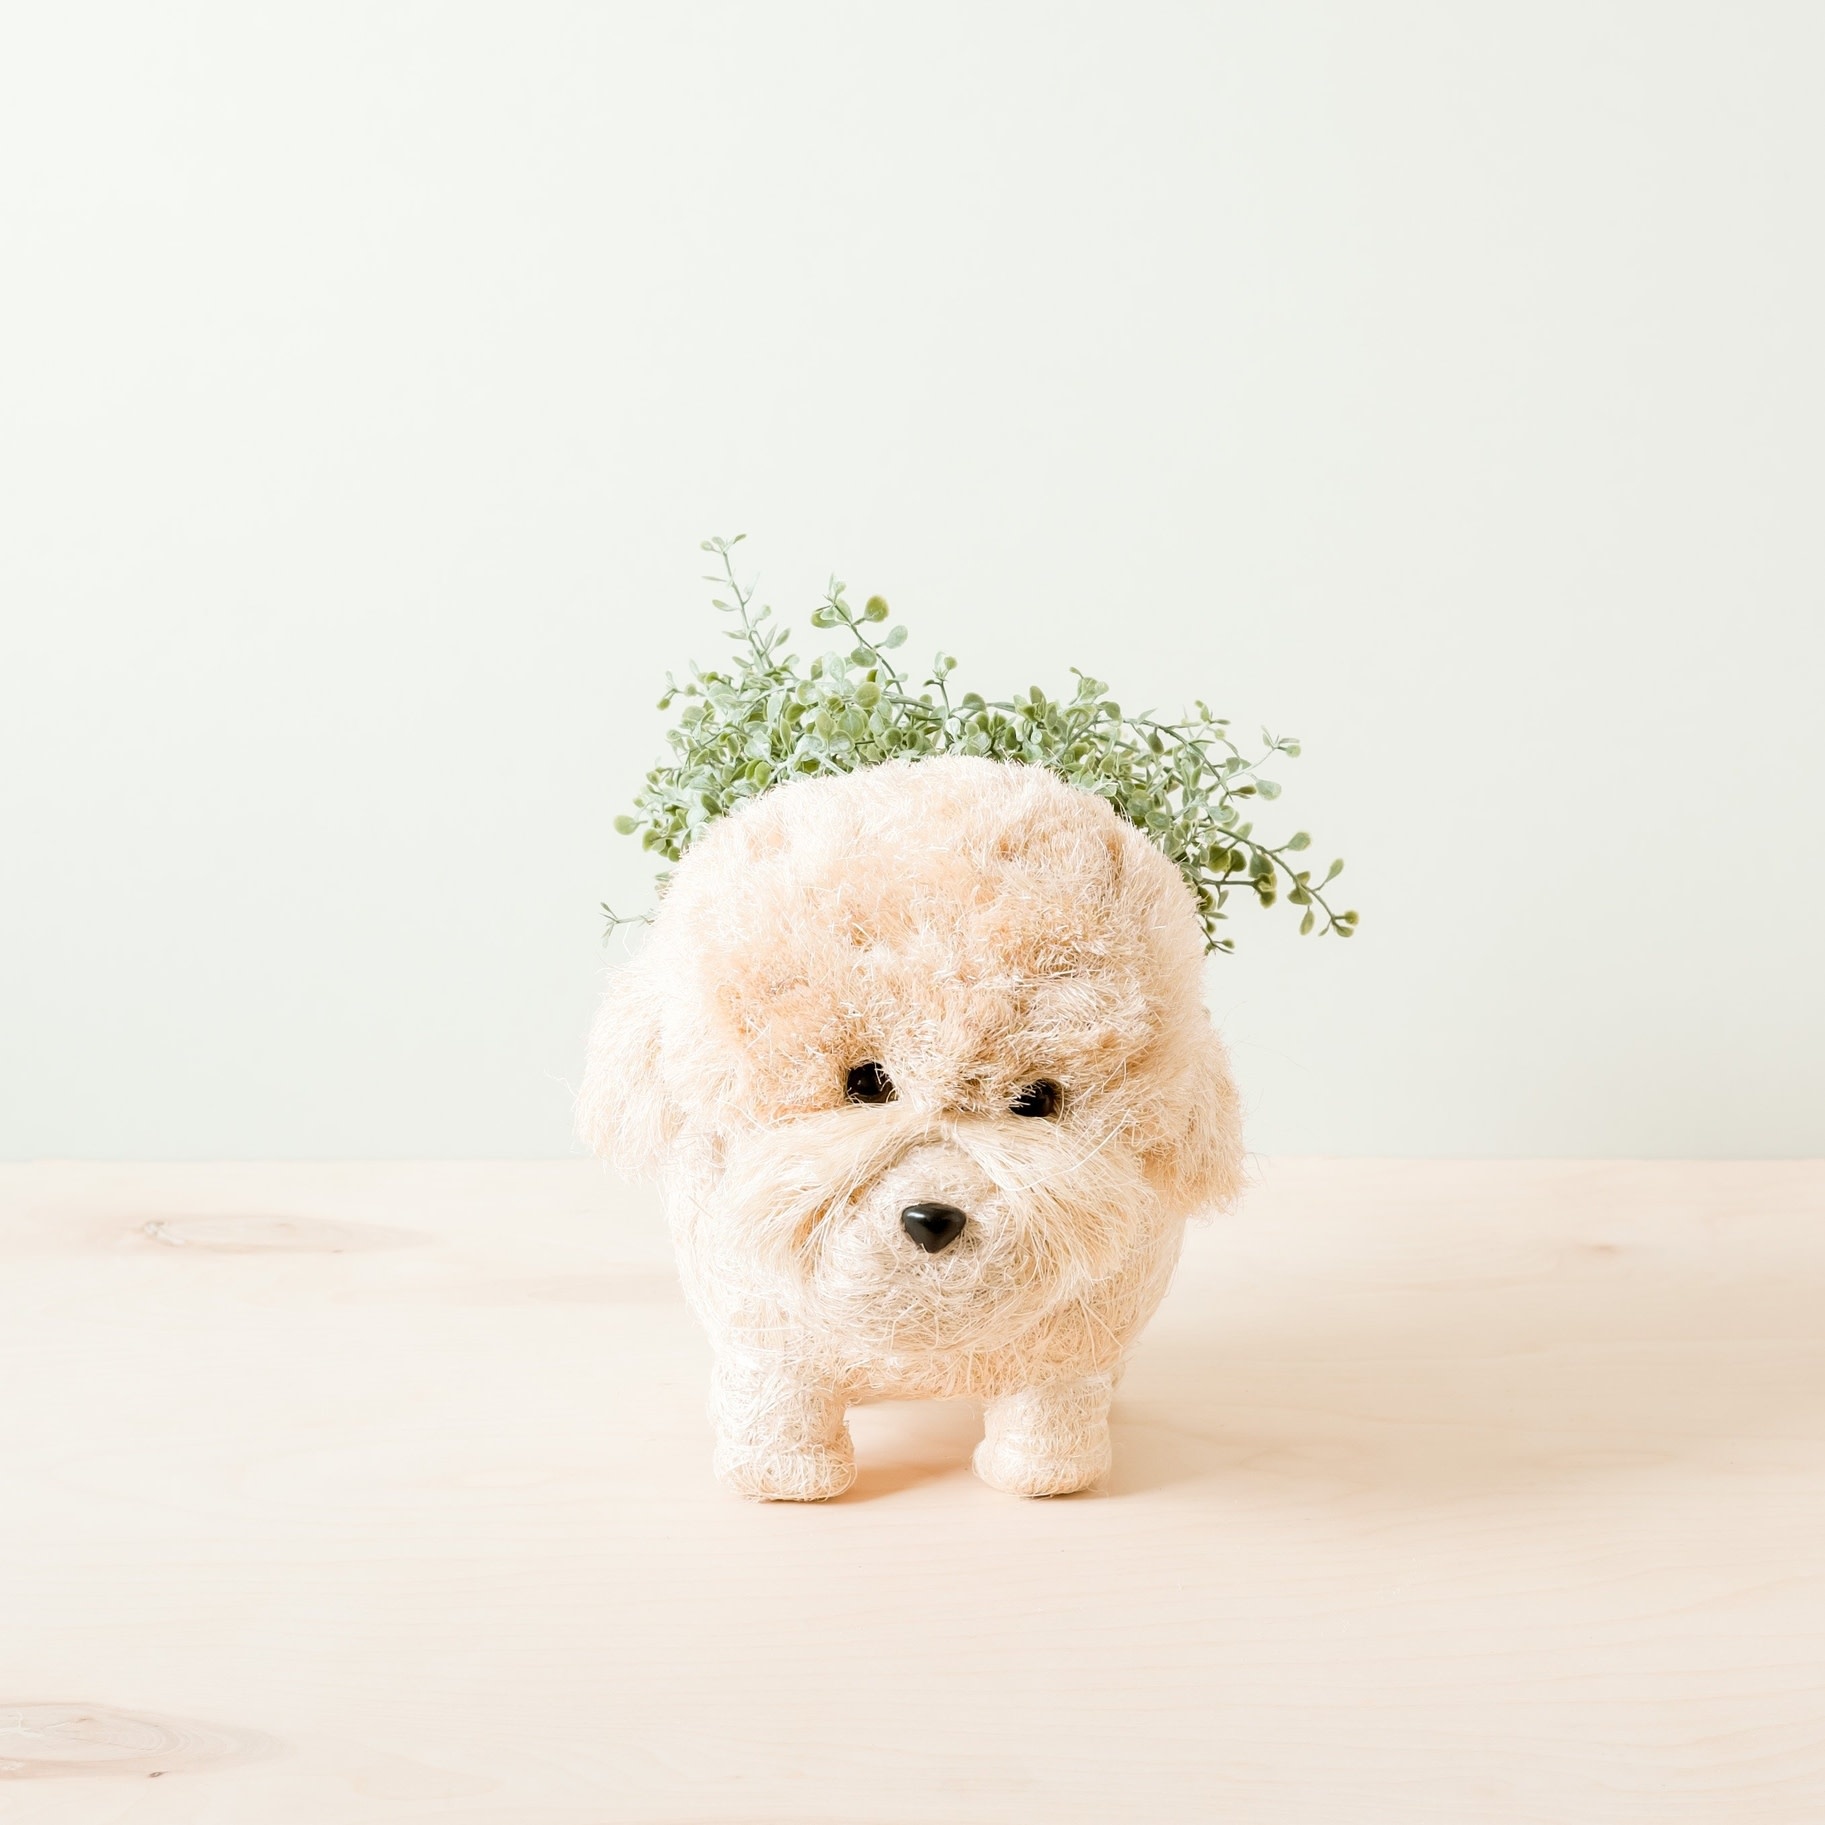 Poodle Planter, Available for local pick up